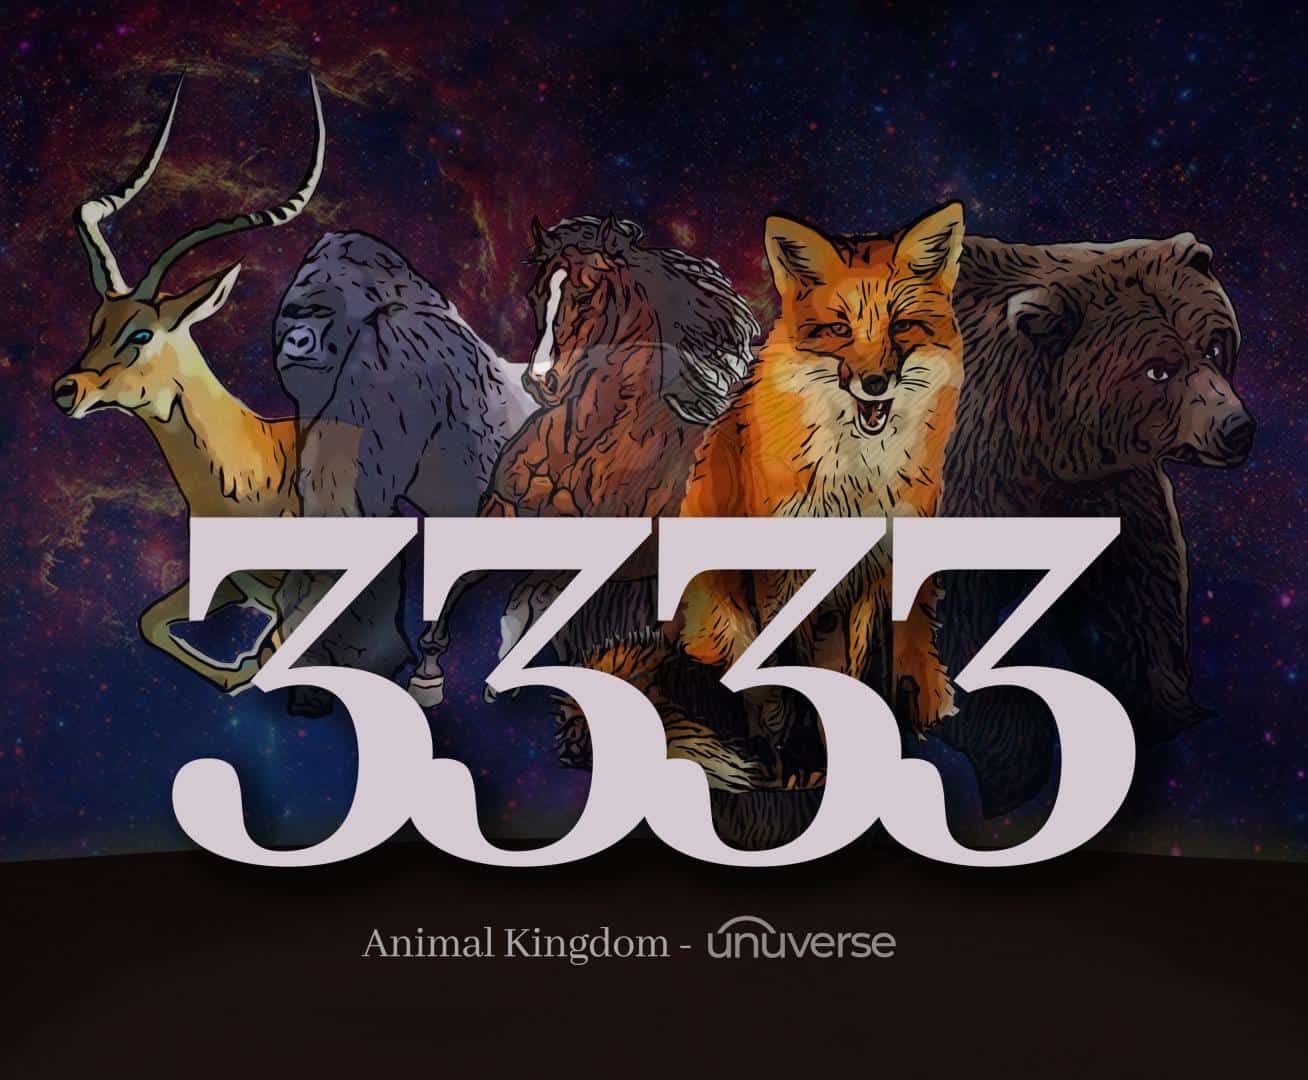 Non-Fungible Token (NFT) Collection - Unuverse Launching 333 Animal Kingdom NFT Collection